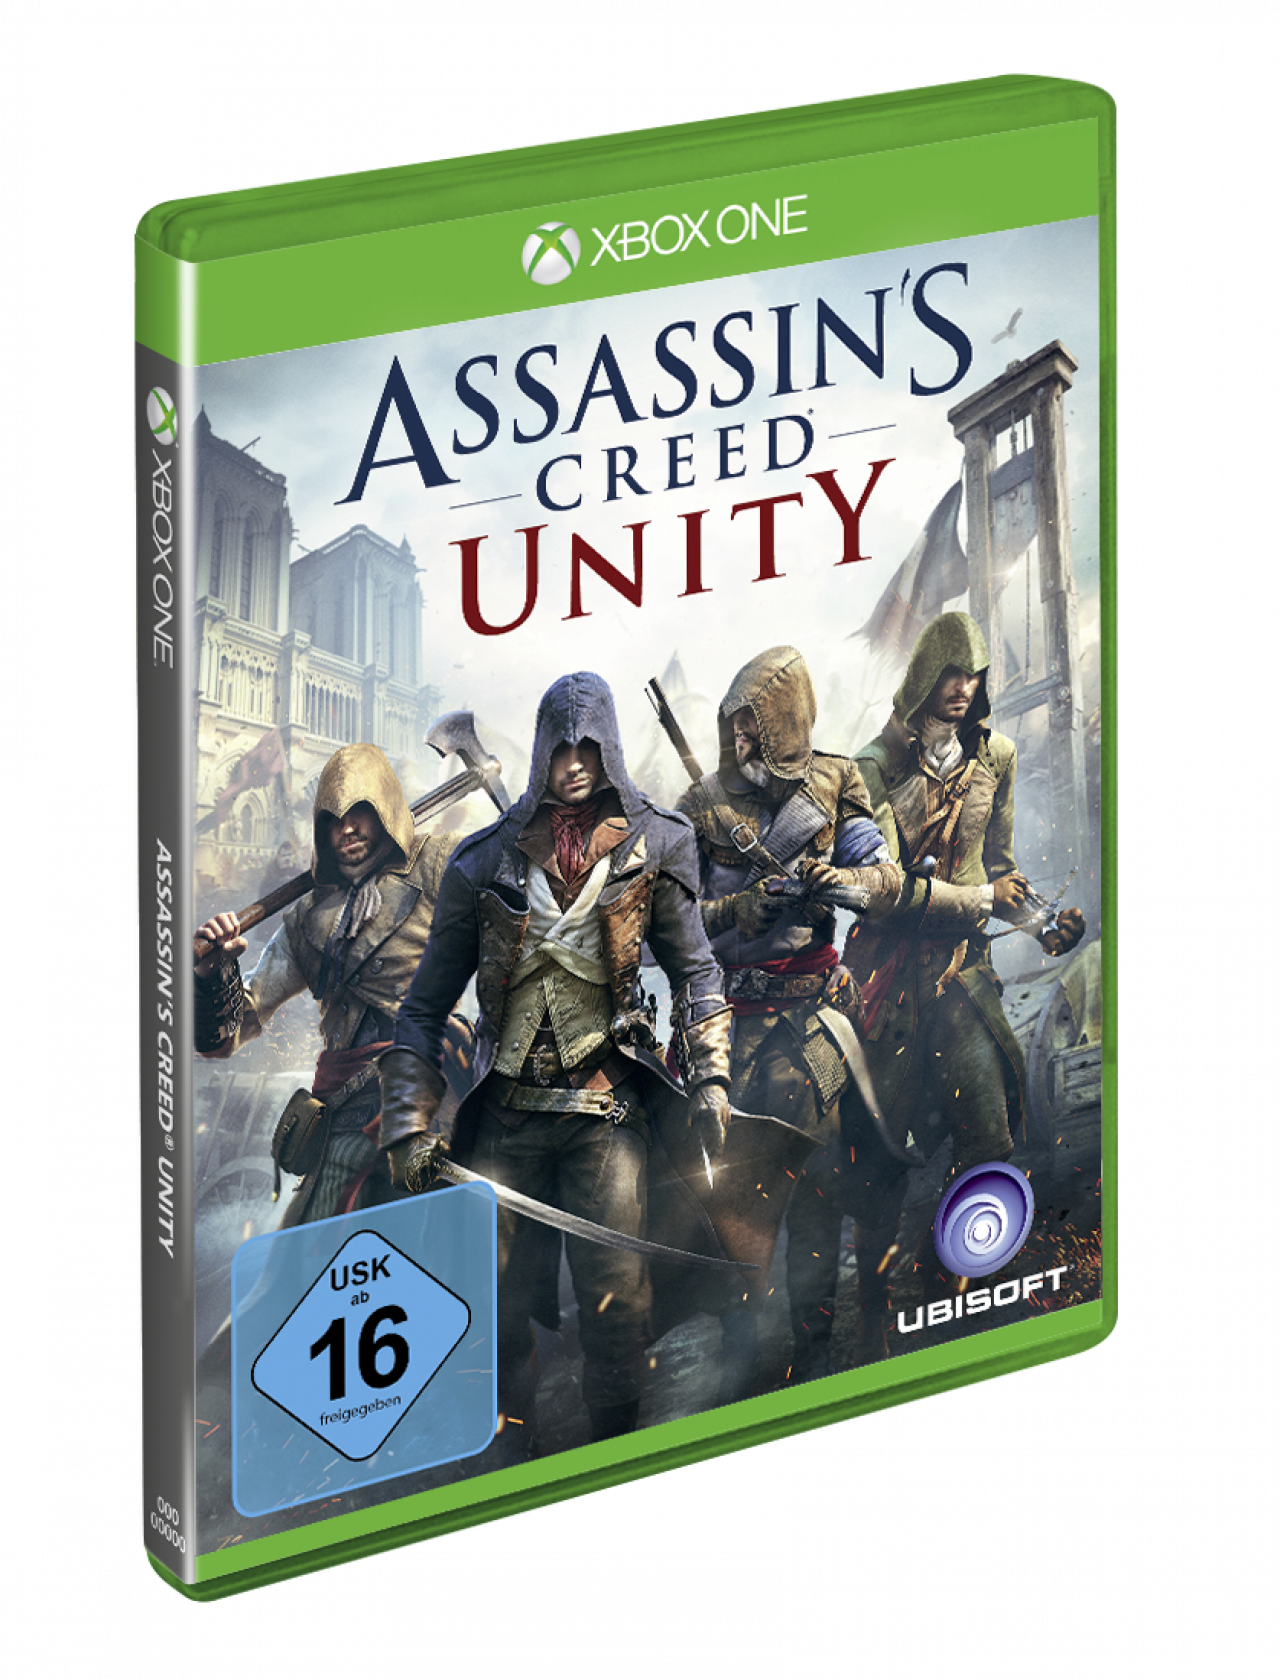 Assassin s xbox 360. Assassin's Creed 1 Xbox 360 русская версия. Диски Assassins Creed Unity для Xbox 360. Assassin's Creed Xbox 360 Disc. Assassin's Creed единство Xbox one.